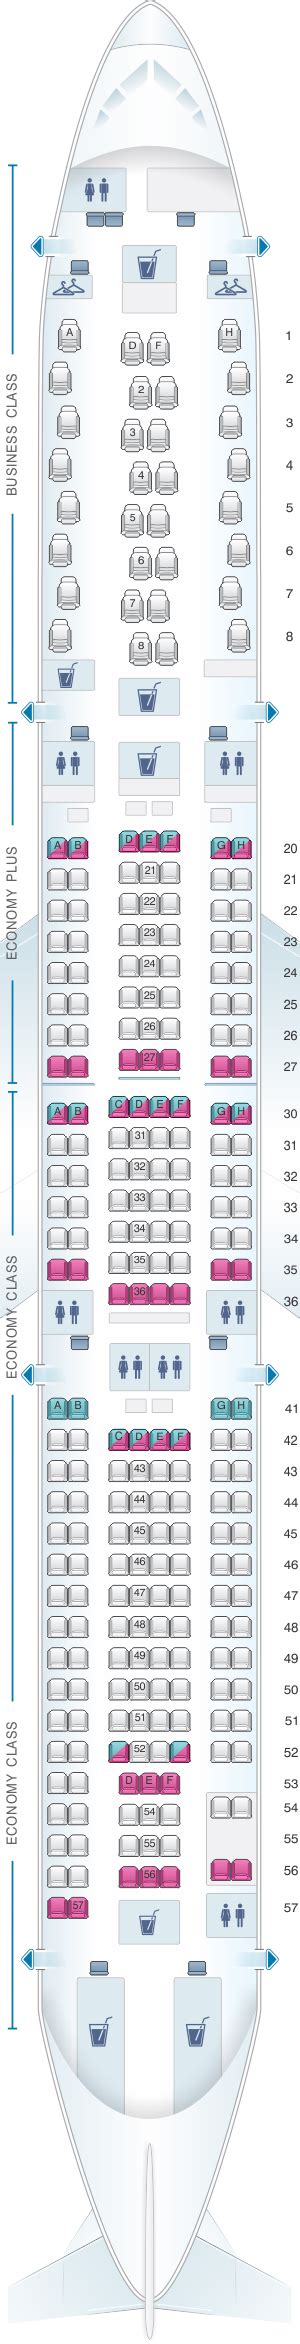 Gallery Of Seat Map Airbus A330 300 Swiss Airlines Best Seats In Plane